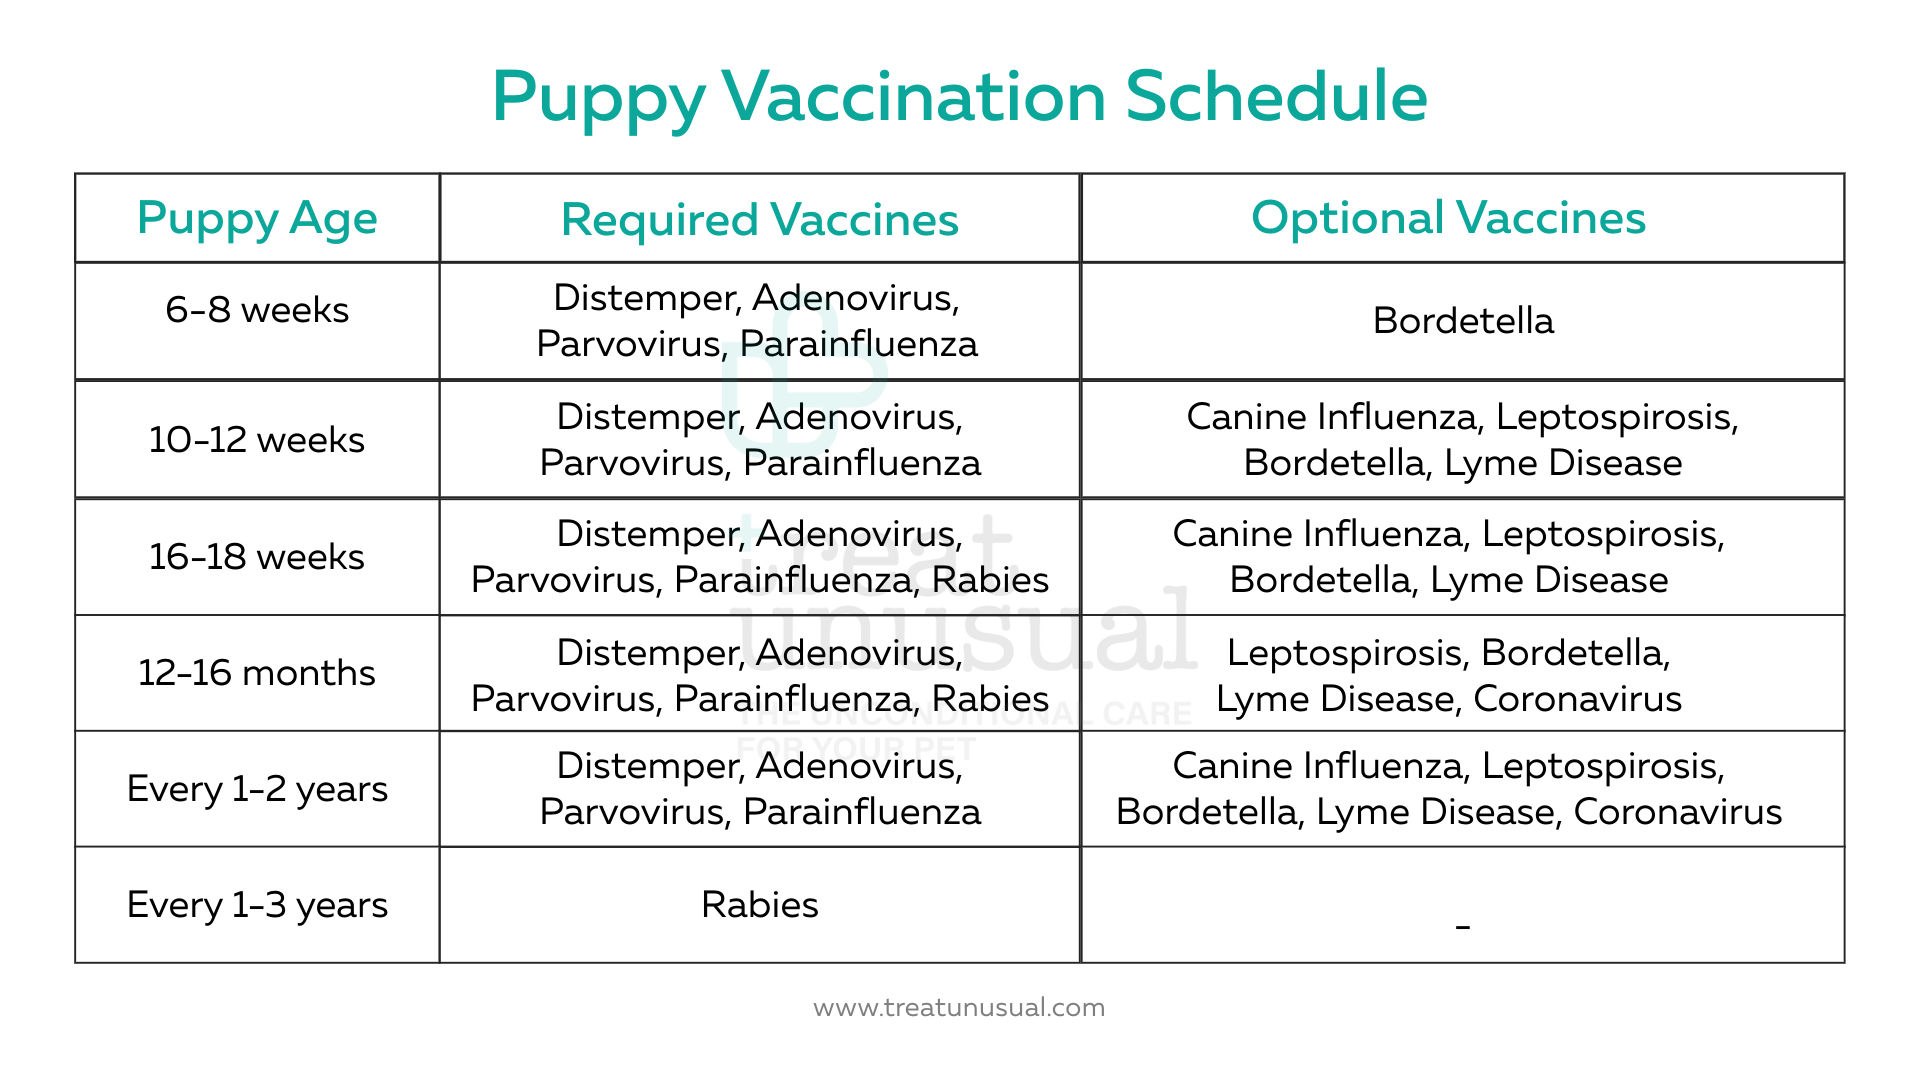 pet hospital in kerala, pethospital for dags, pet hospital for cats, pet hospital for birds, pet hospital for exotic and avian pets, veterinary clinic near me, animal hospital near me, emergency vet near me, vet open now, veterinarian, pet care, pet wellness, preventive care for pets, pet vaccinations, pet spay and neuter, pet acupuncture, dog heartworm test, cat dental cleaning, avian vet, pet euthanasia, best veterinarian for senior dogs in Alappuzha Kerala, affordable spay and neuter clinic near Kerala India, veterinarian specializing in exotic pets, emergency vet care for rabbits, Haripad veterinary clinic, Kochi animal hospital, emergency vet care in Alappuzha